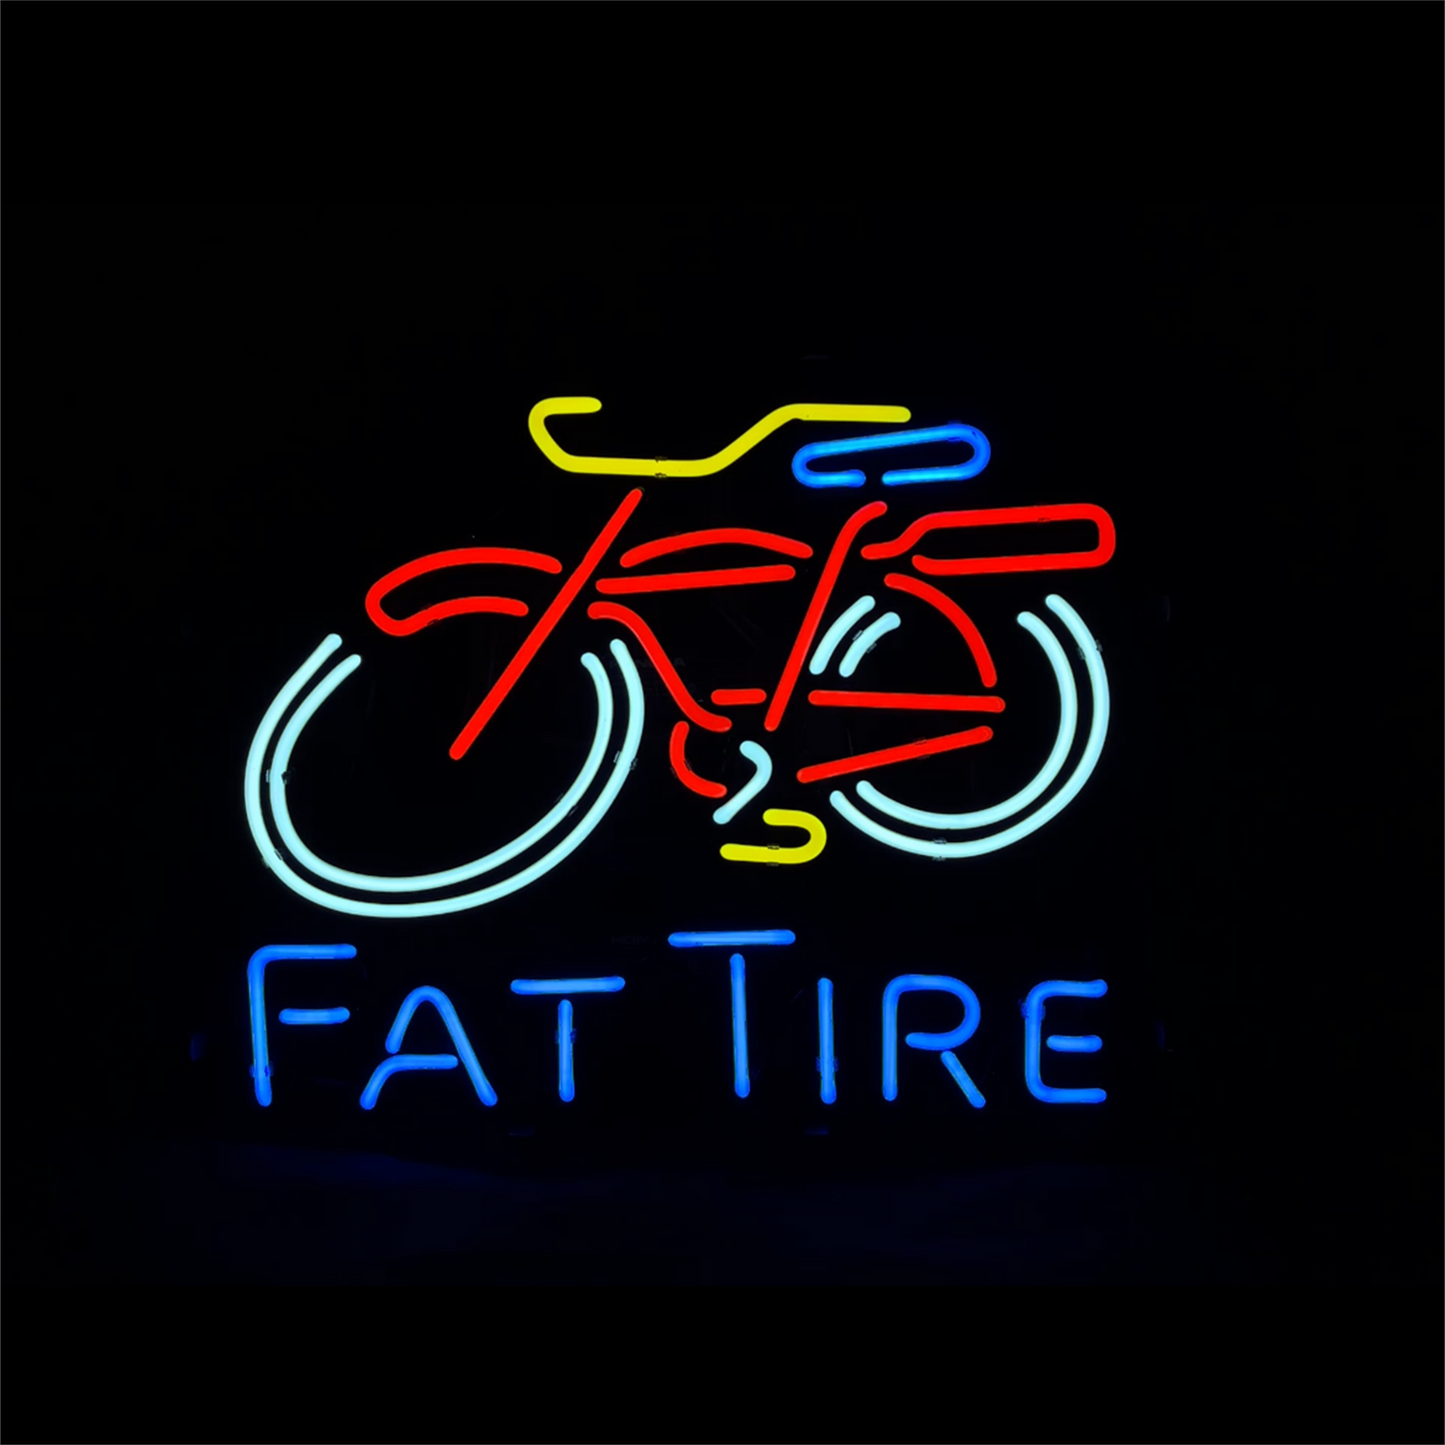 FAT TIRE BICYCLE